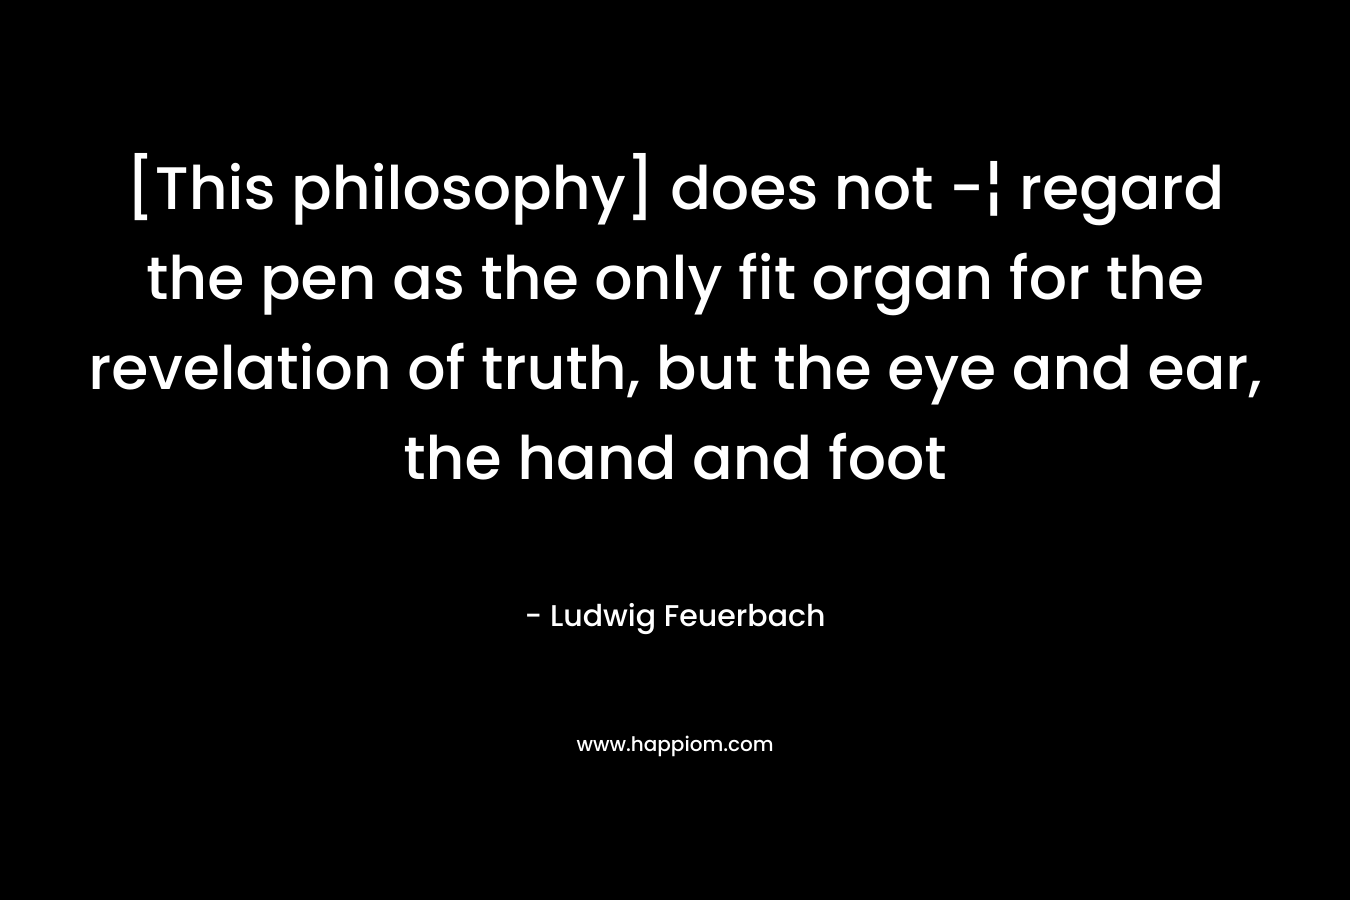 [This philosophy] does not -¦ regard the pen as the only fit organ for the revelation of truth, but the eye and ear, the hand and foot – Ludwig Feuerbach